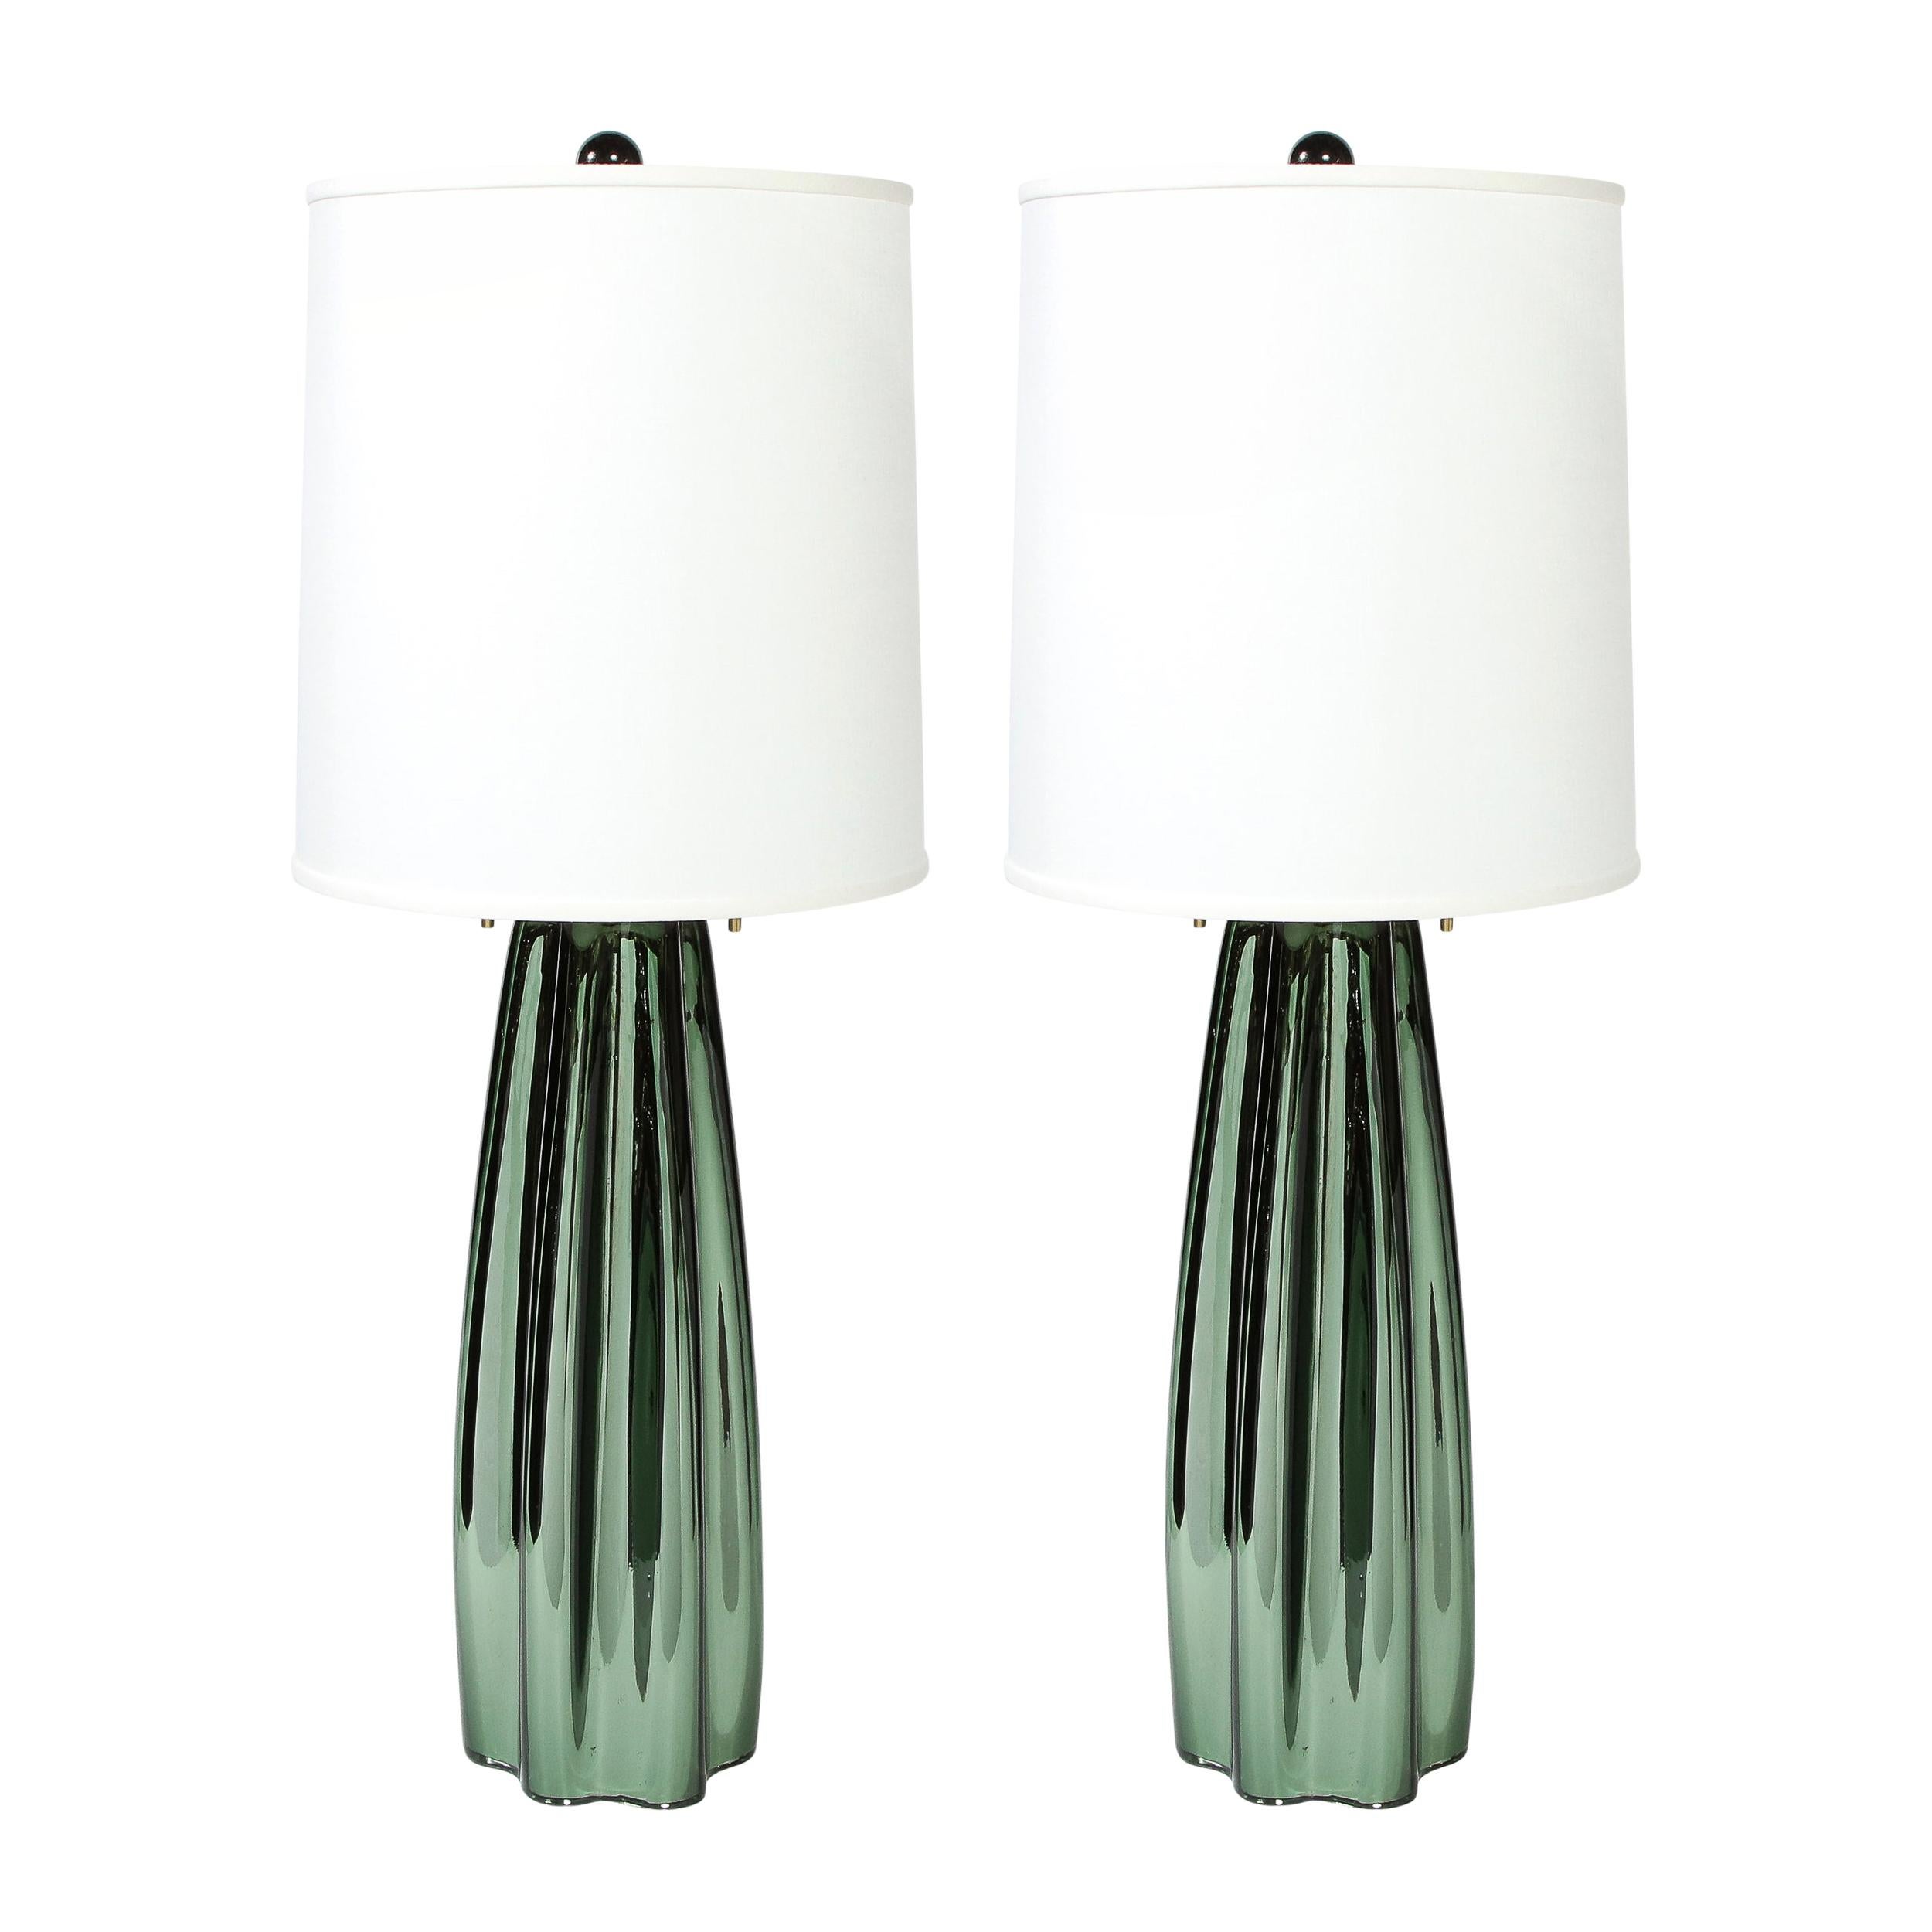 Pair of Channel Form Handblown Murano Iridiscent Viridian Green Table Lamps